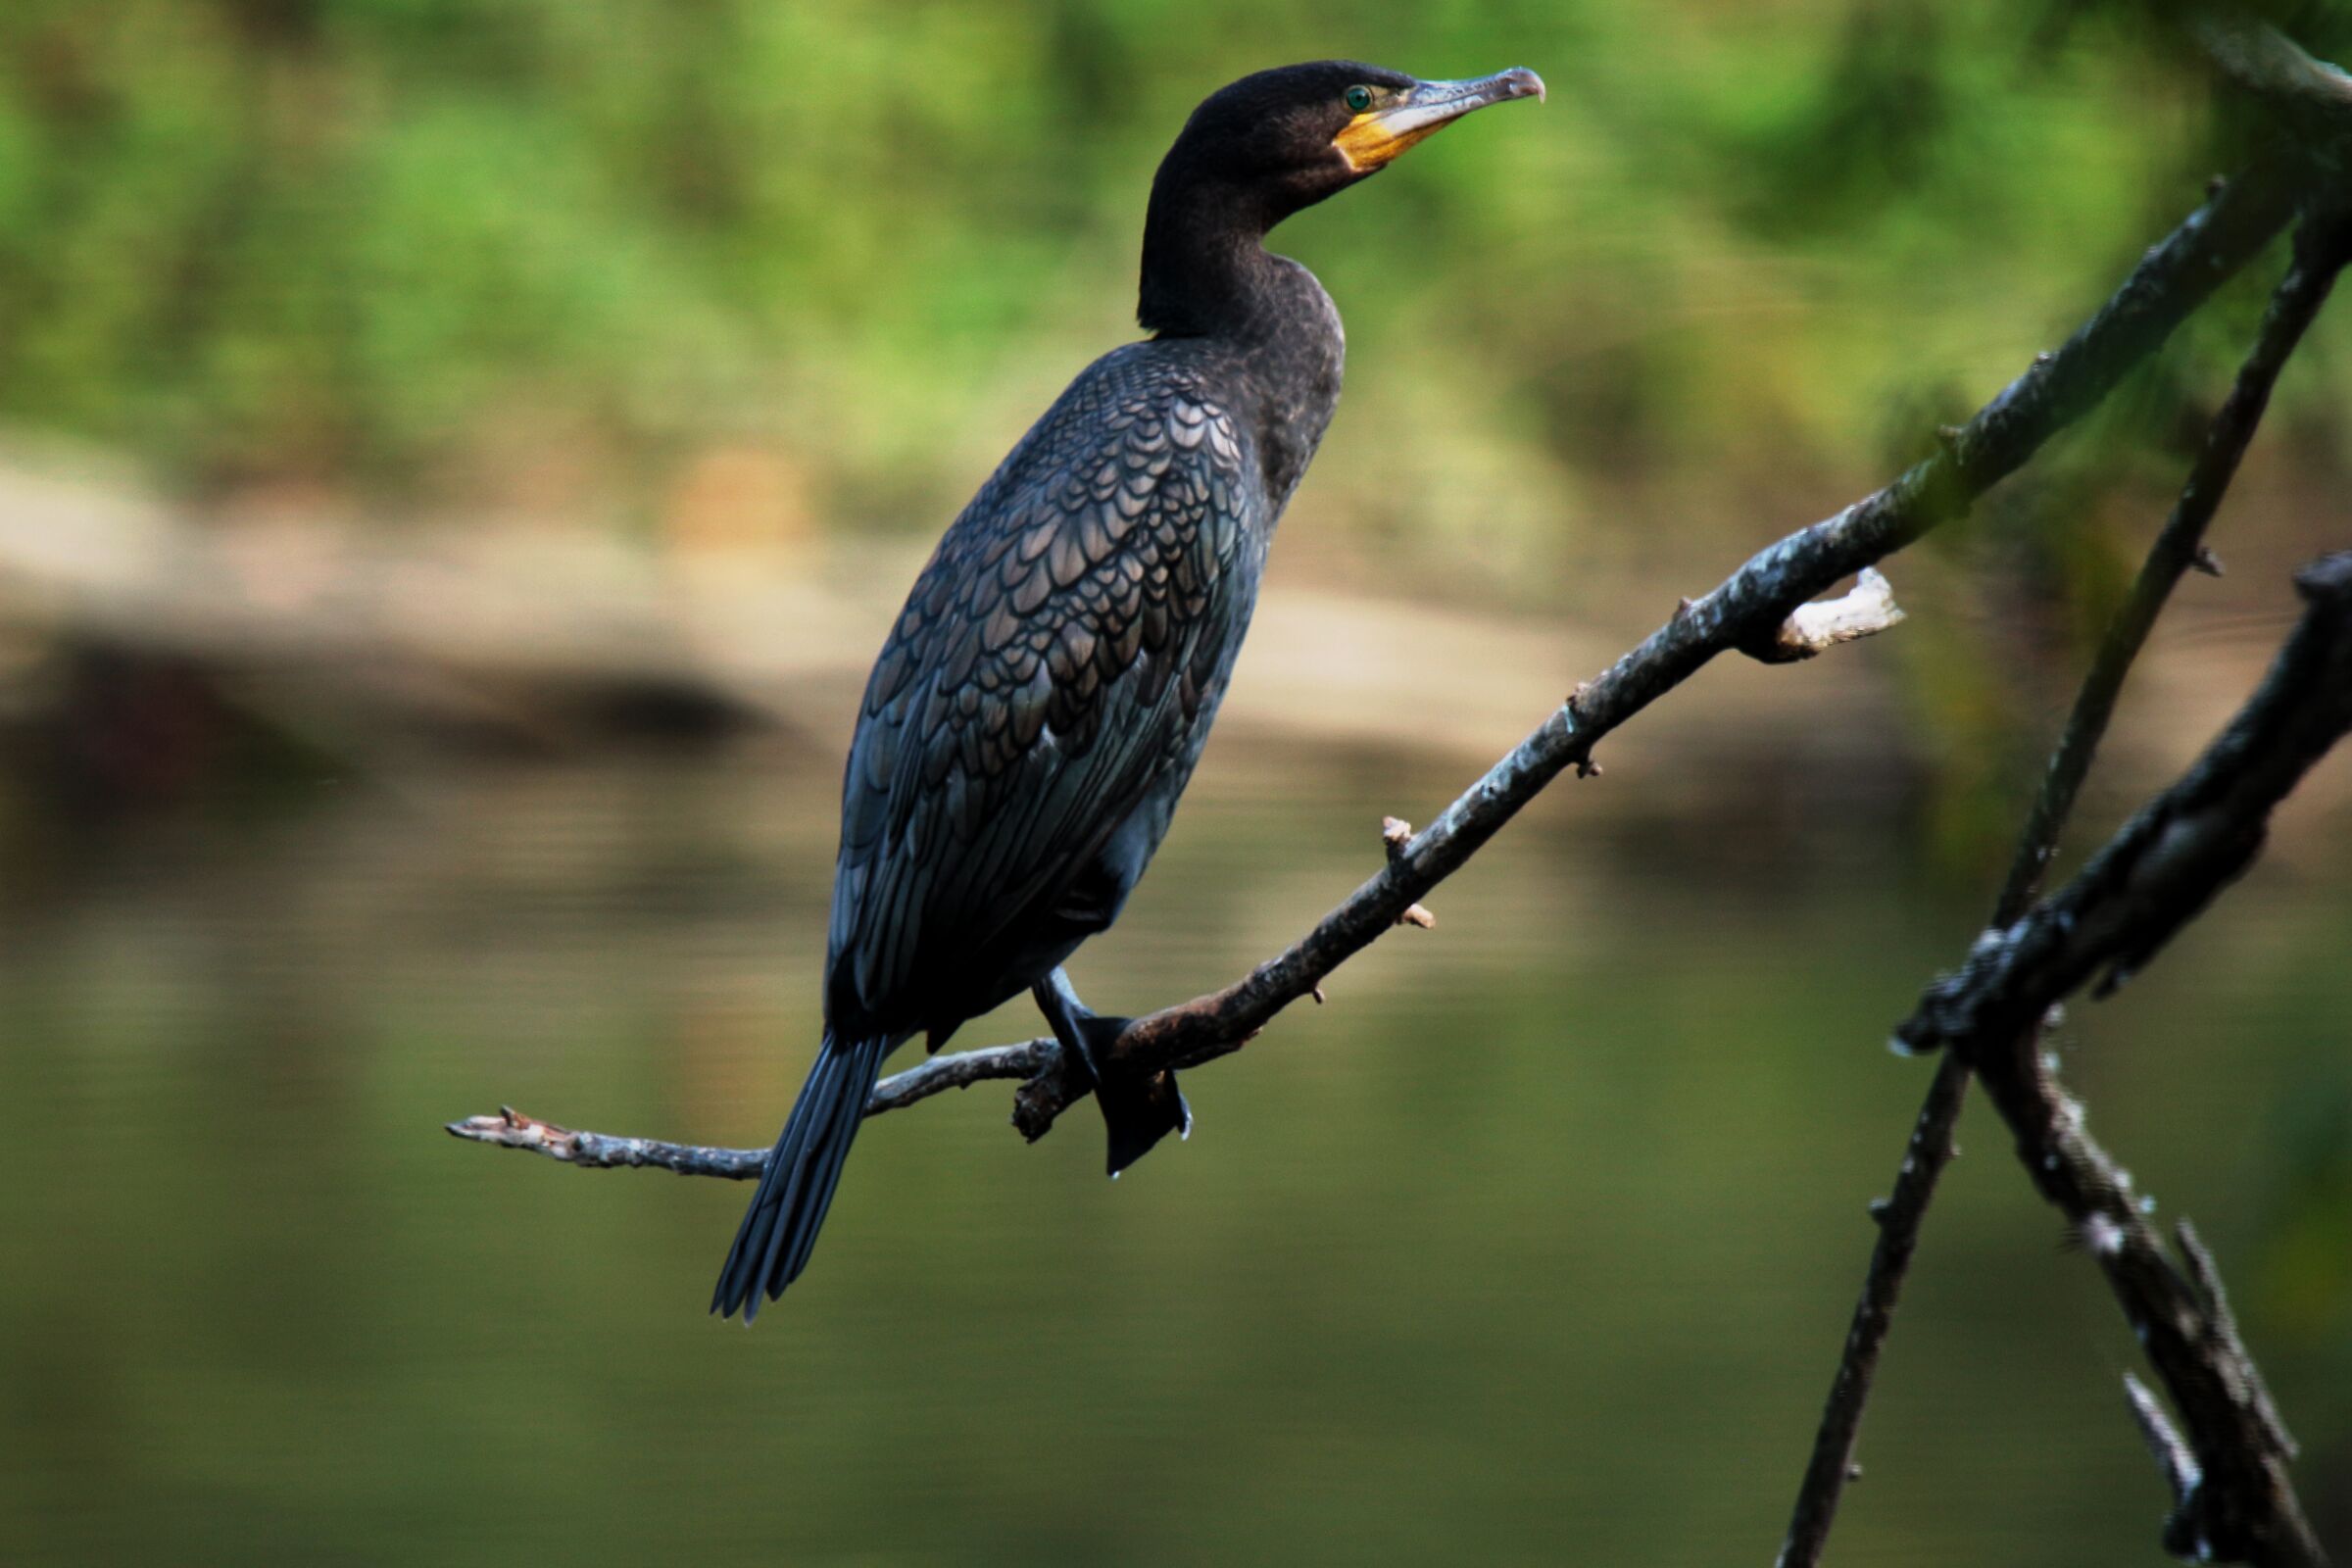 the cormorant waiting you look around...